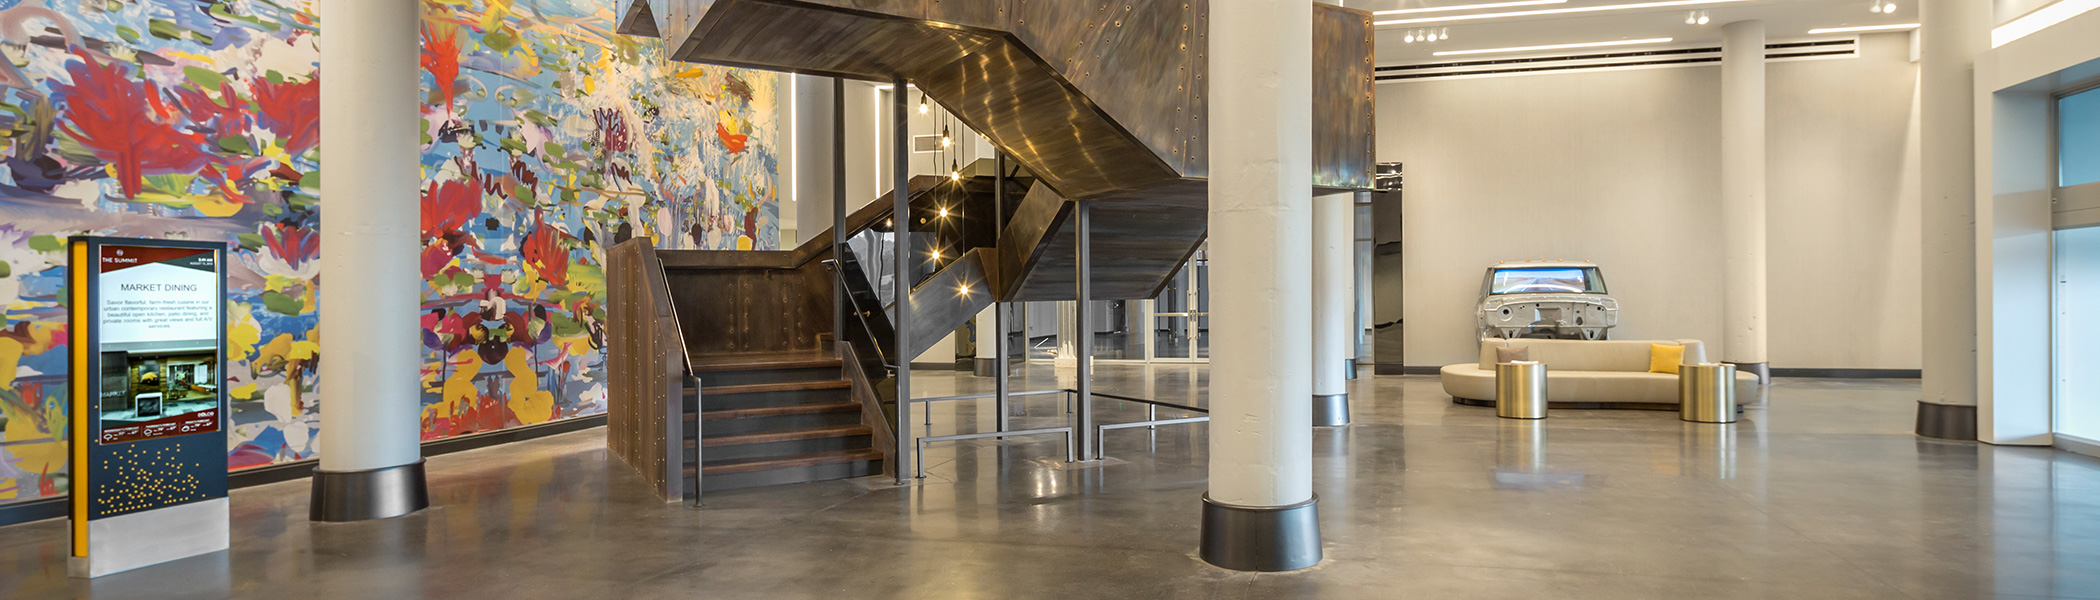 a lobby featuring a large staircase and artwork covering a full wall